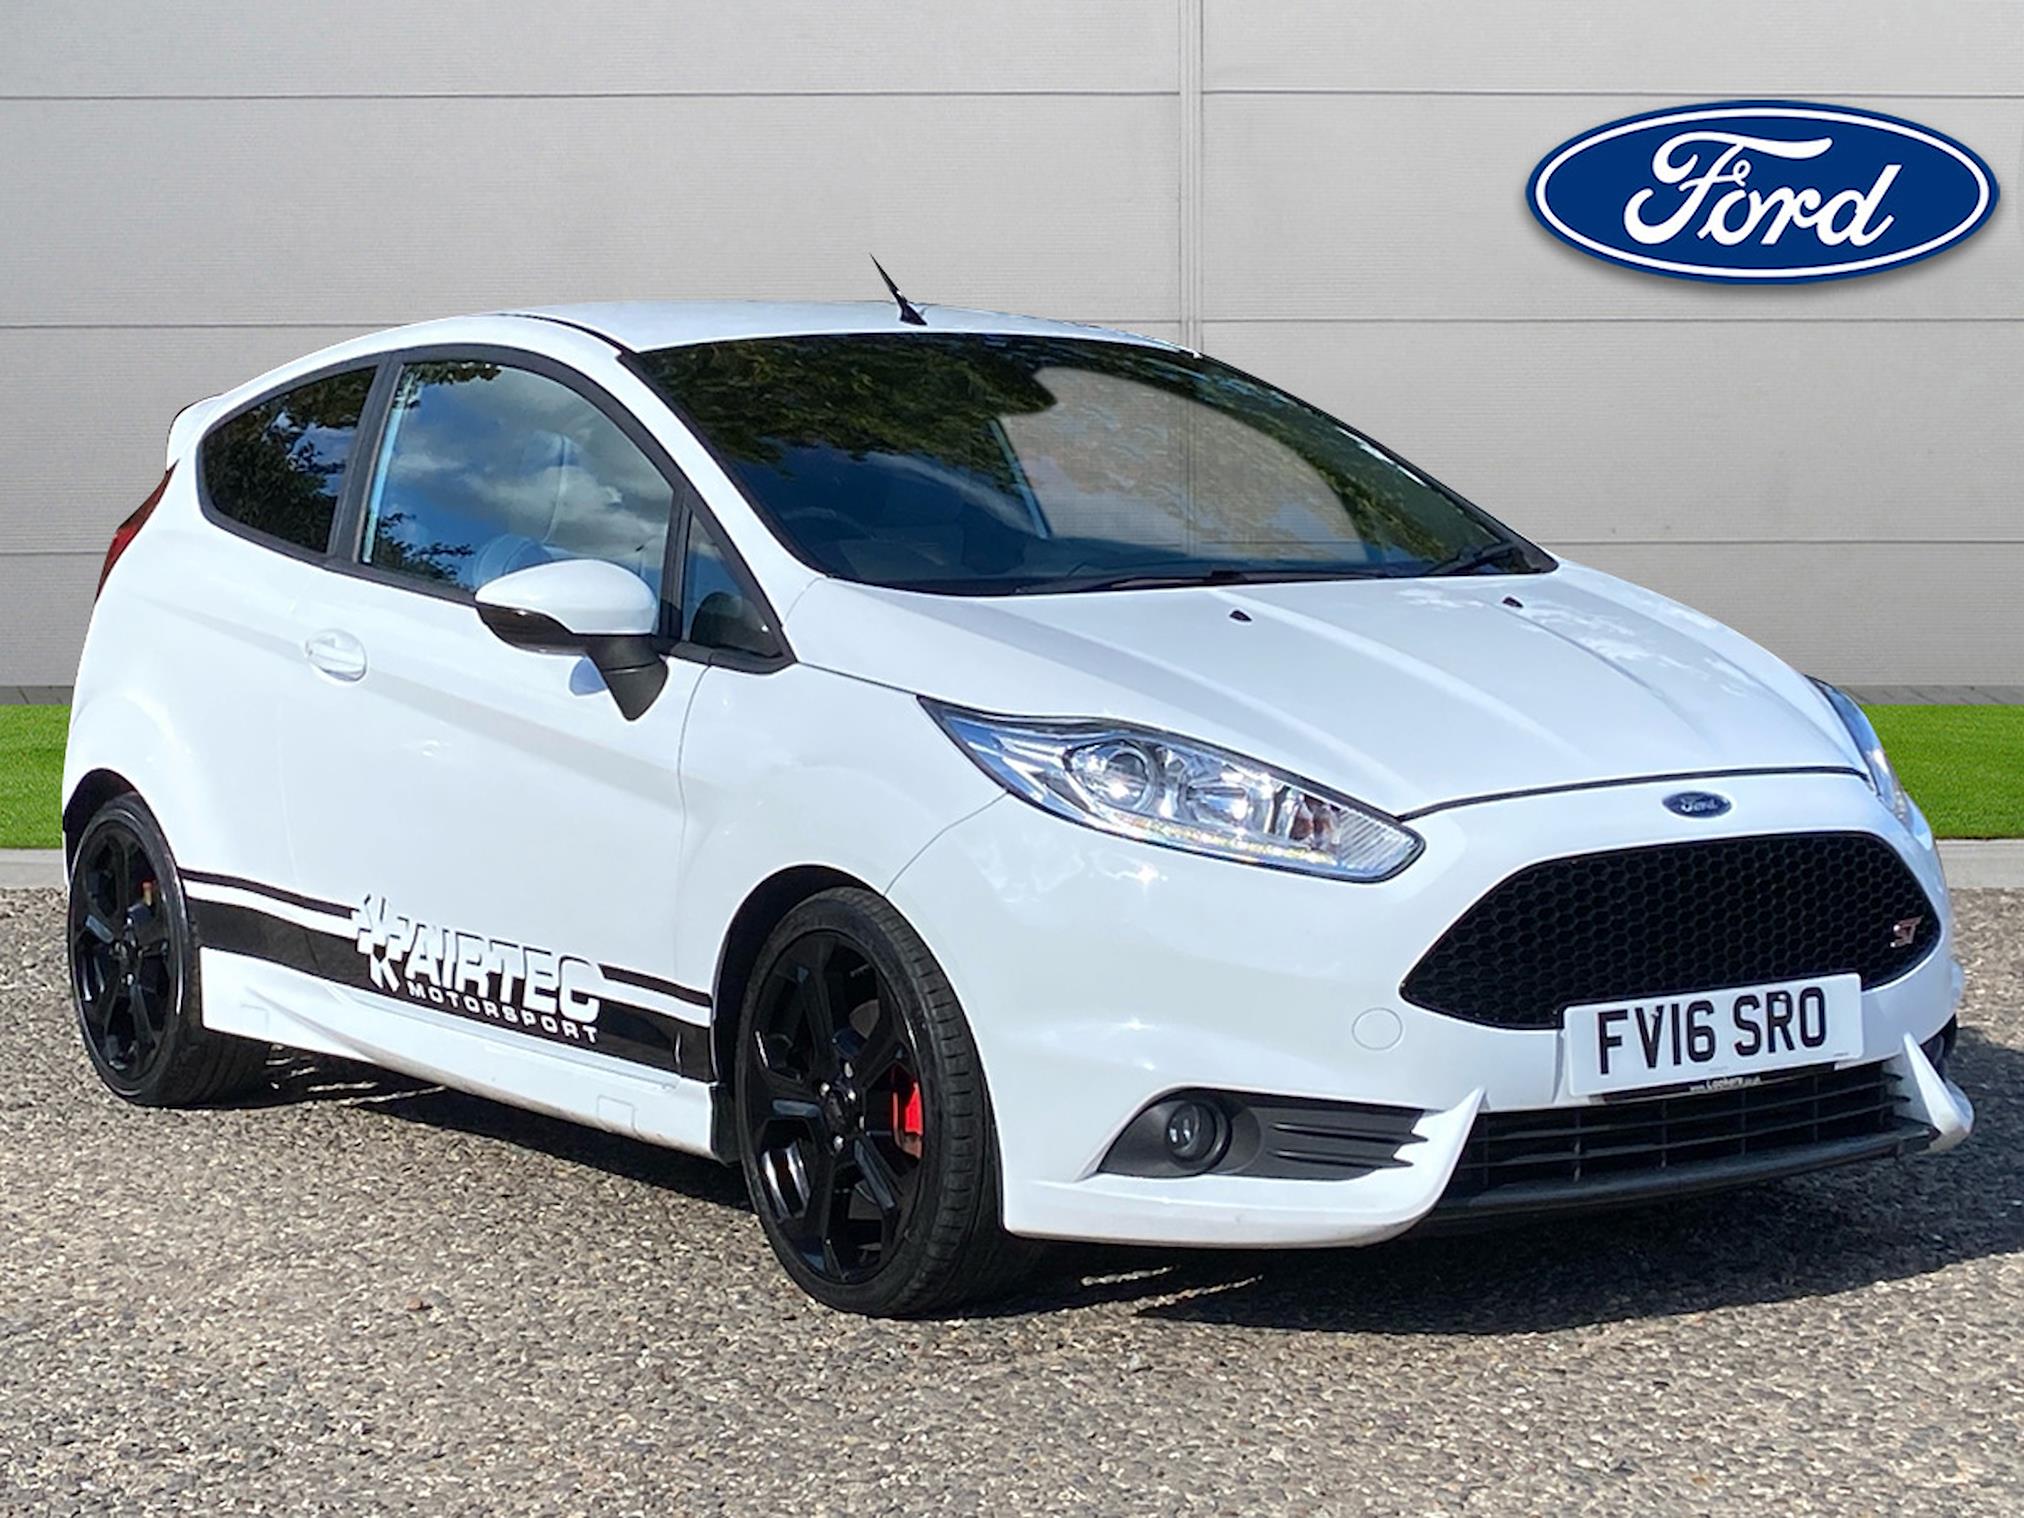 Used FORD FIESTA 1.6 Ecoboost St-3 3Dr 2016